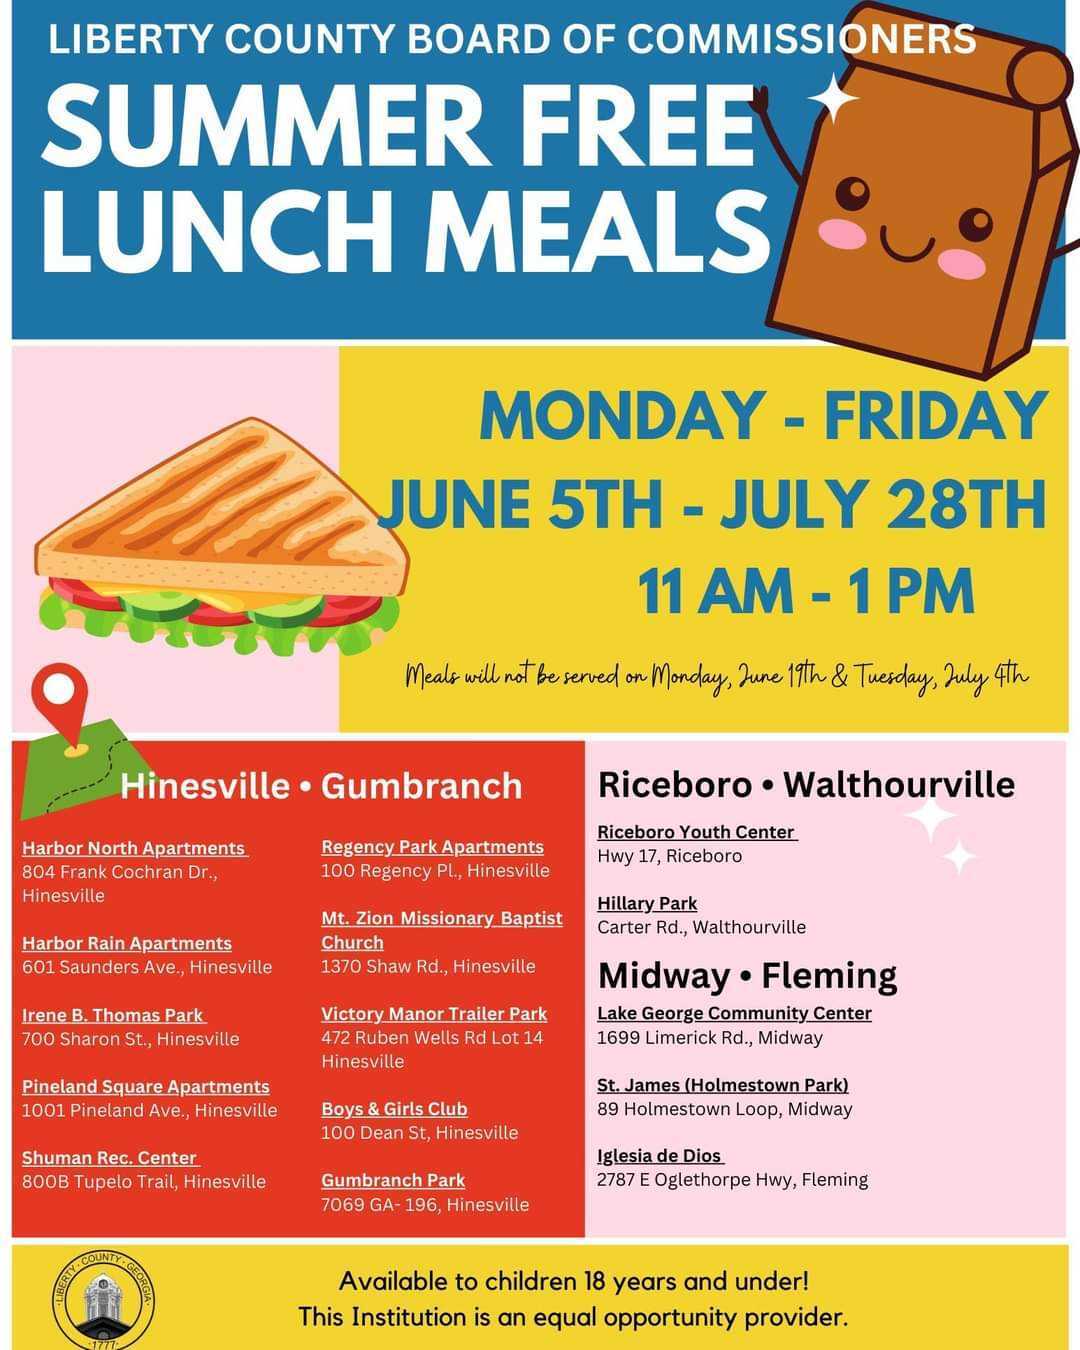 Summer Free Lunch Meals flyer